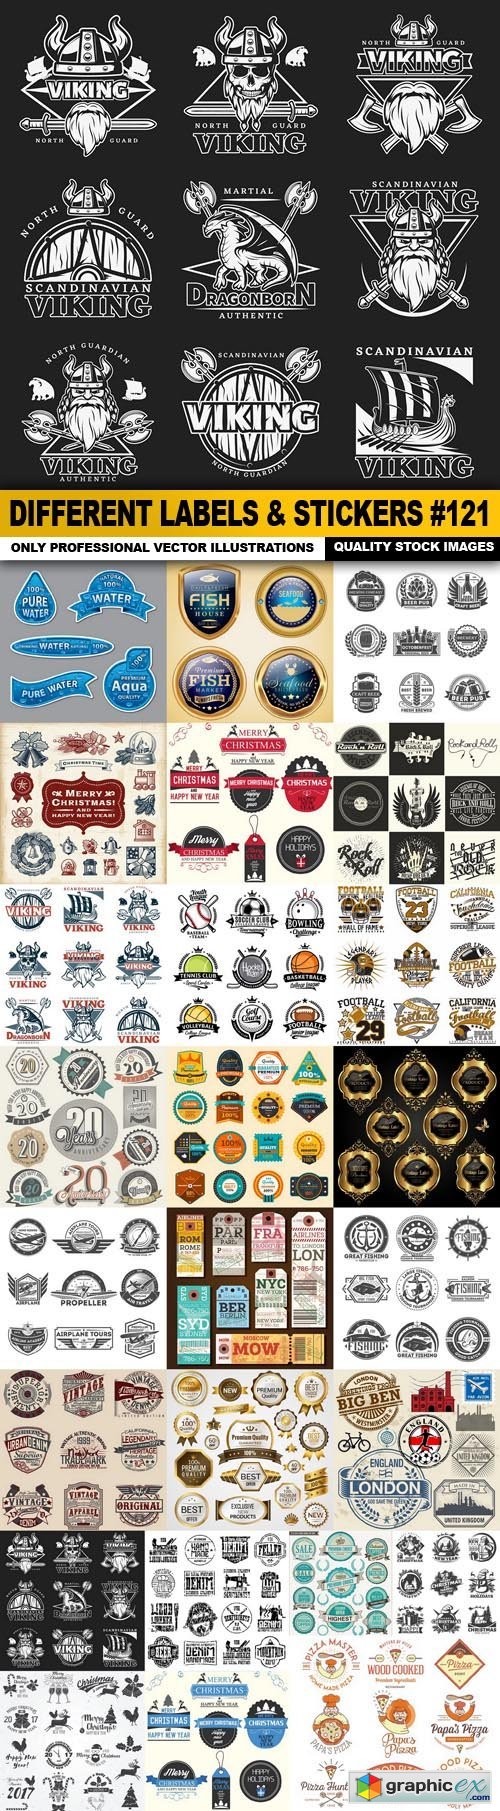 Different Labels & Stickers #121 - 25 Vector